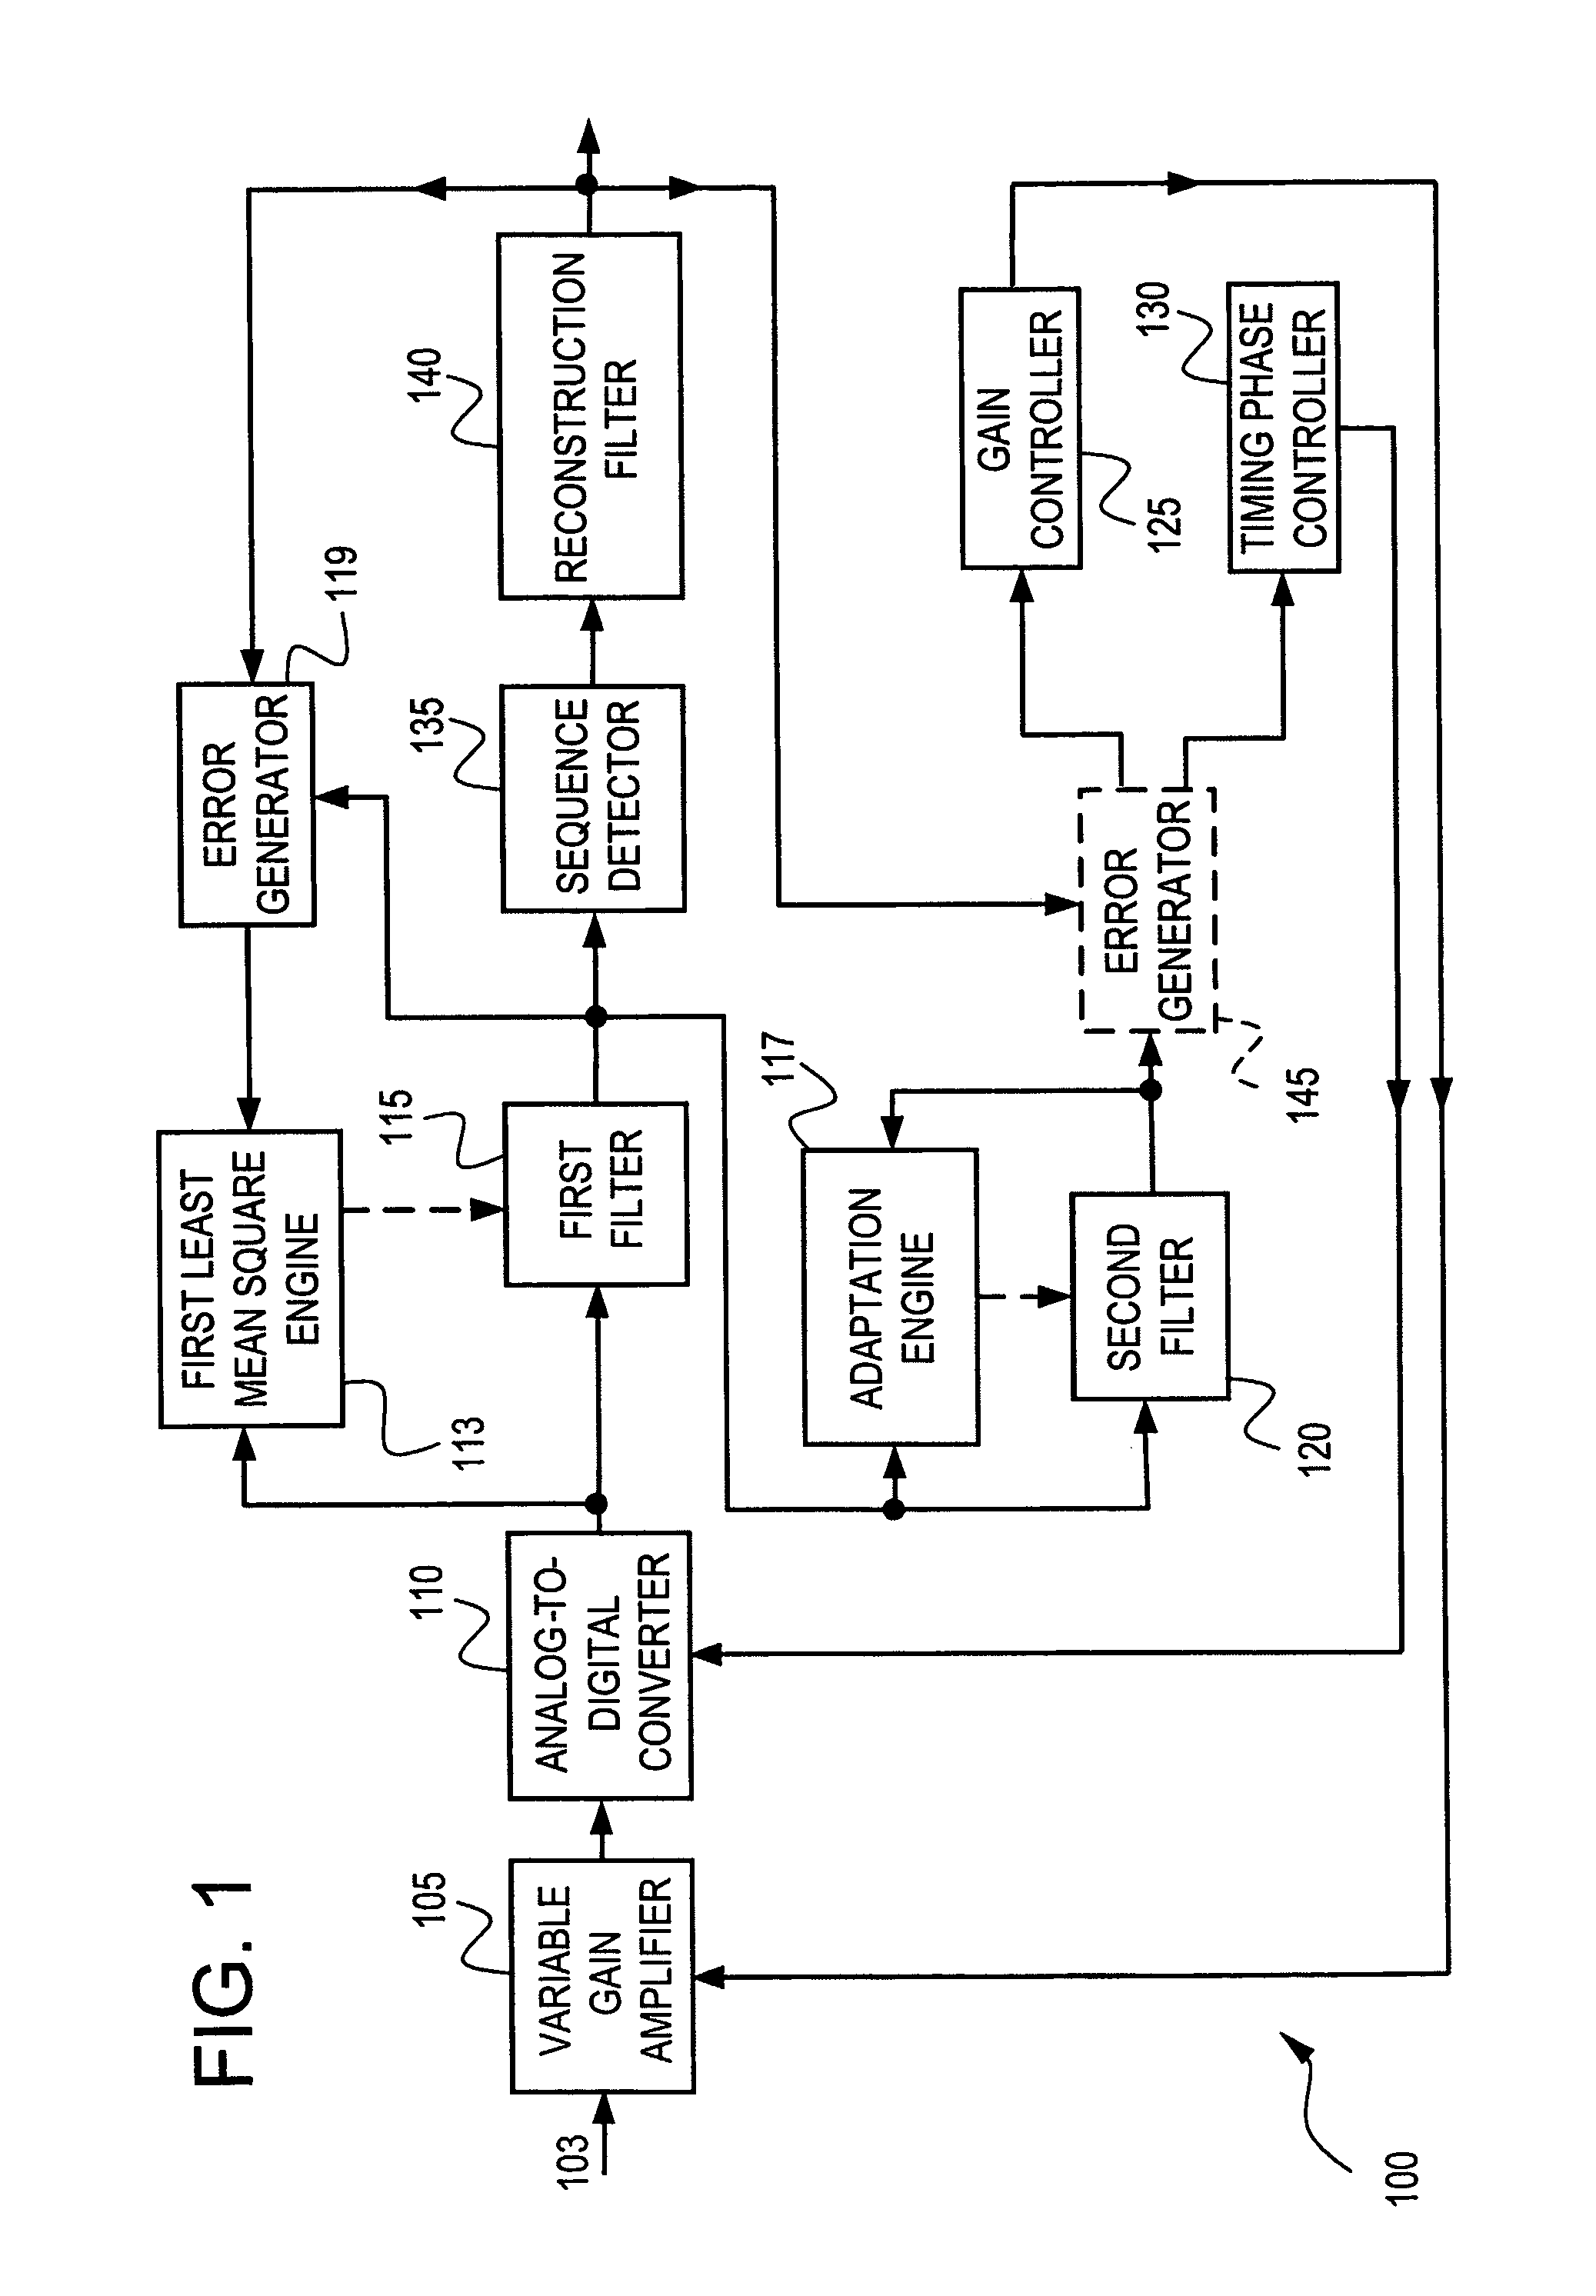 System and method for controlling gain and timing phase in a presence of a first least mean square filter using a second adaptive filter